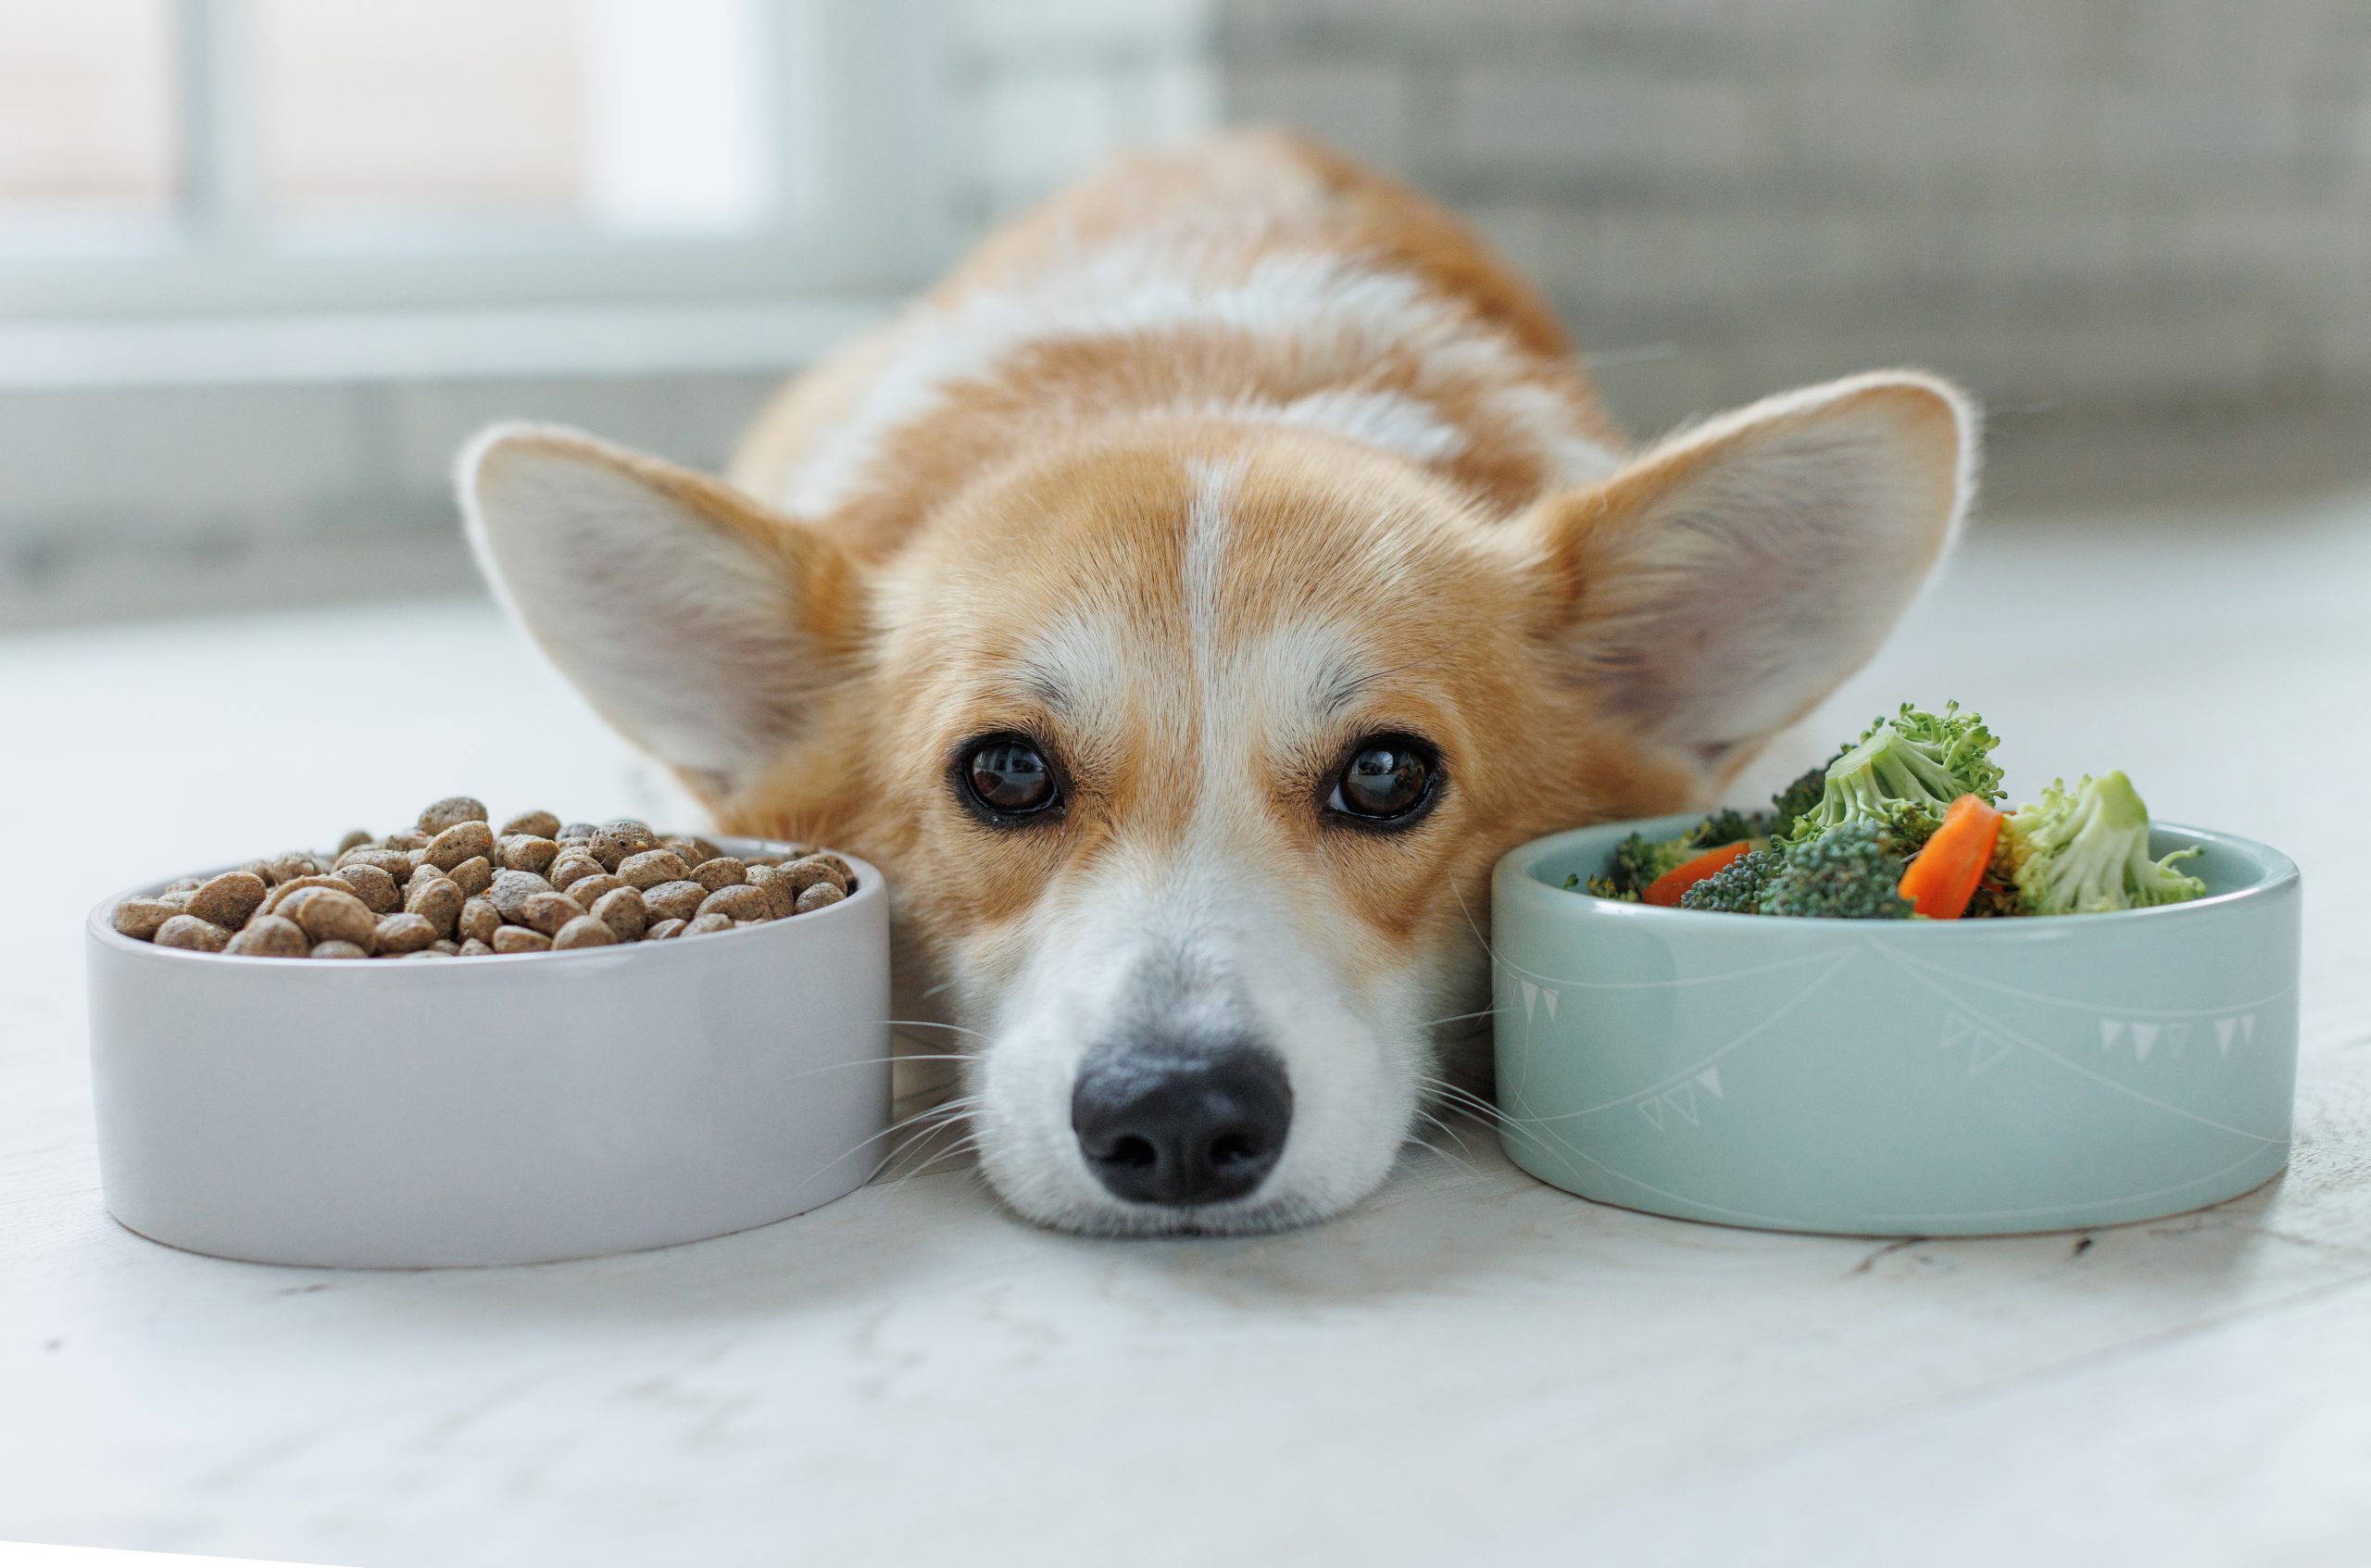 How Quality Nutrition & Pet Insurance Can Improve Your Pet’s Life